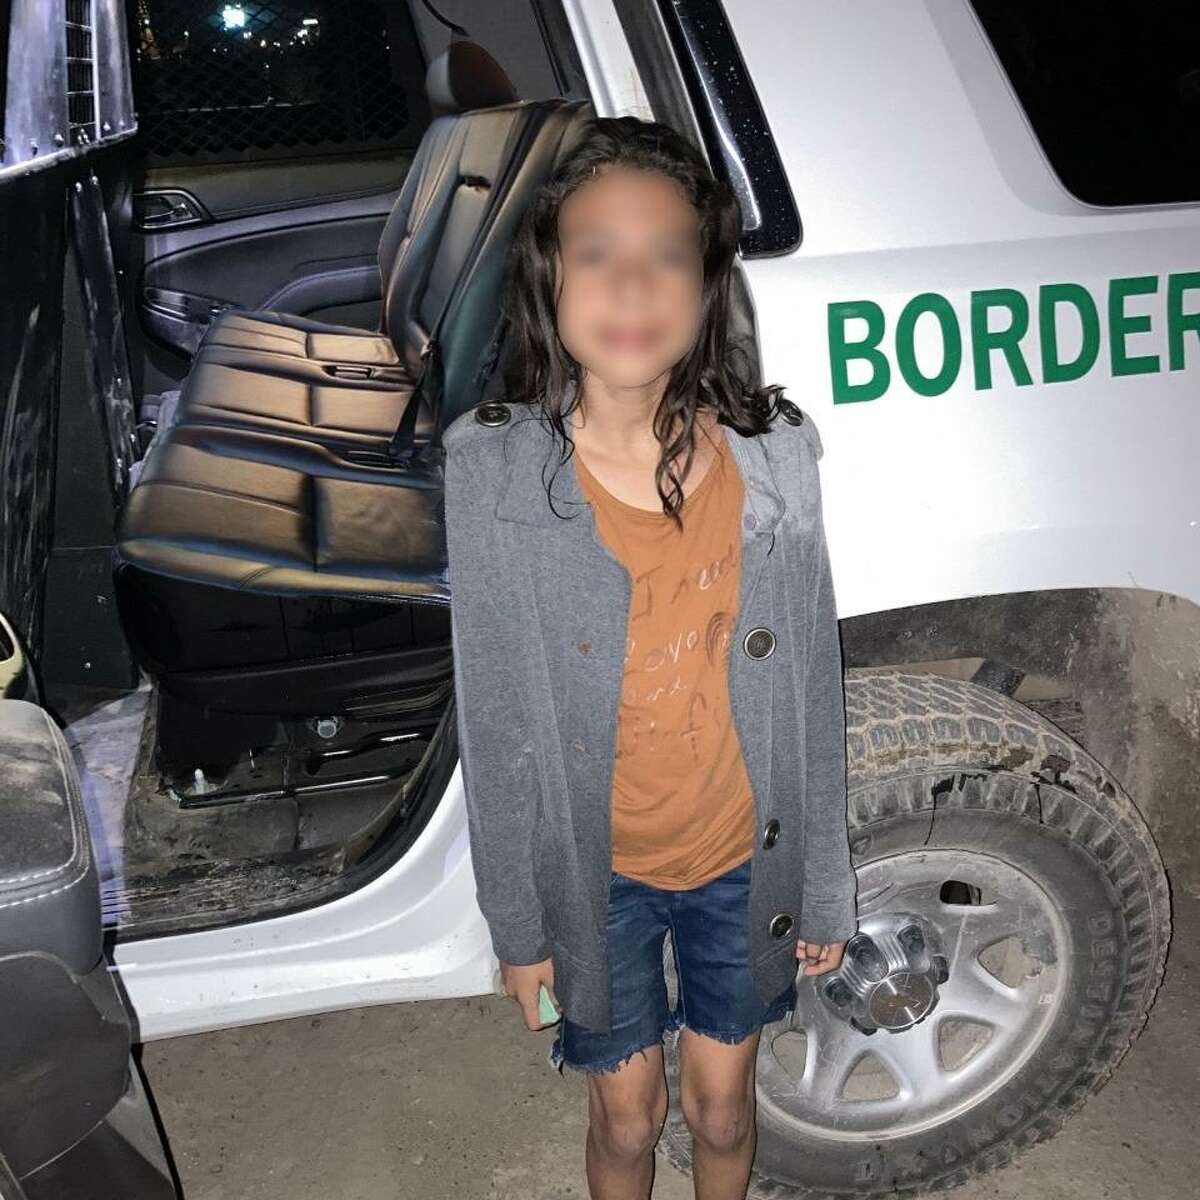 U.S. Border Patrol agents said smugglers abandoned this girl on the riverbanks as they returned to Mexico. An Army soldier rescued her after the soldier saw her struggling to get out of the river due to the swift river current and steep riverbank.